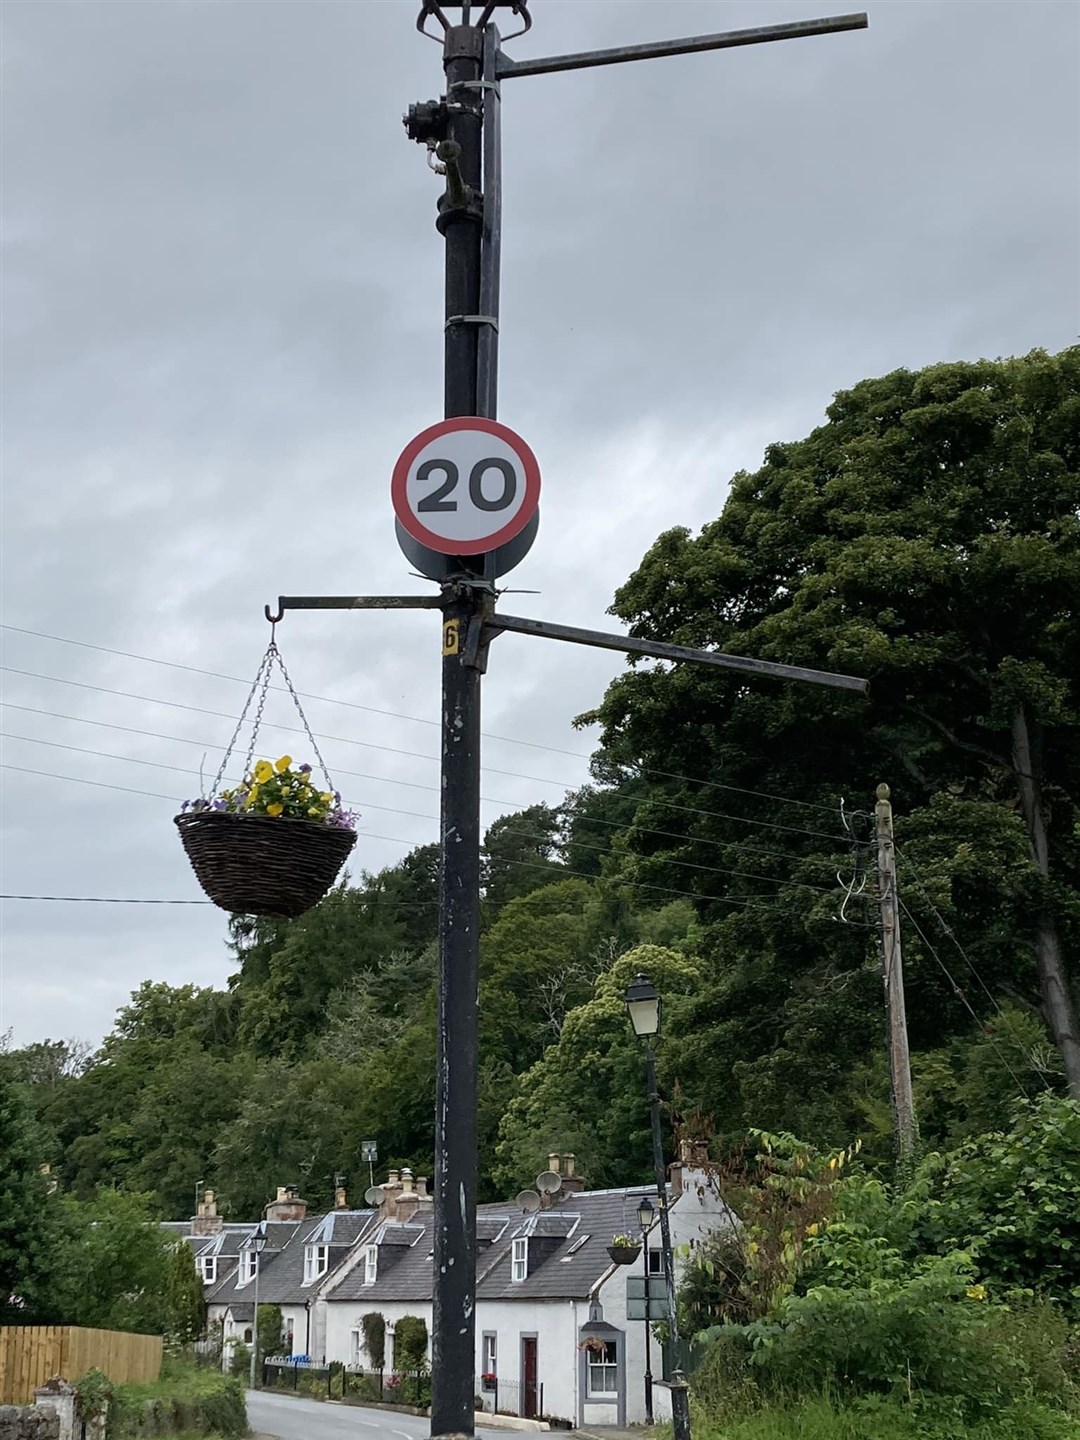 Black Isle councillor Sarah Atkin shared an image of one of the new signs and praised the local community council for its efforts.